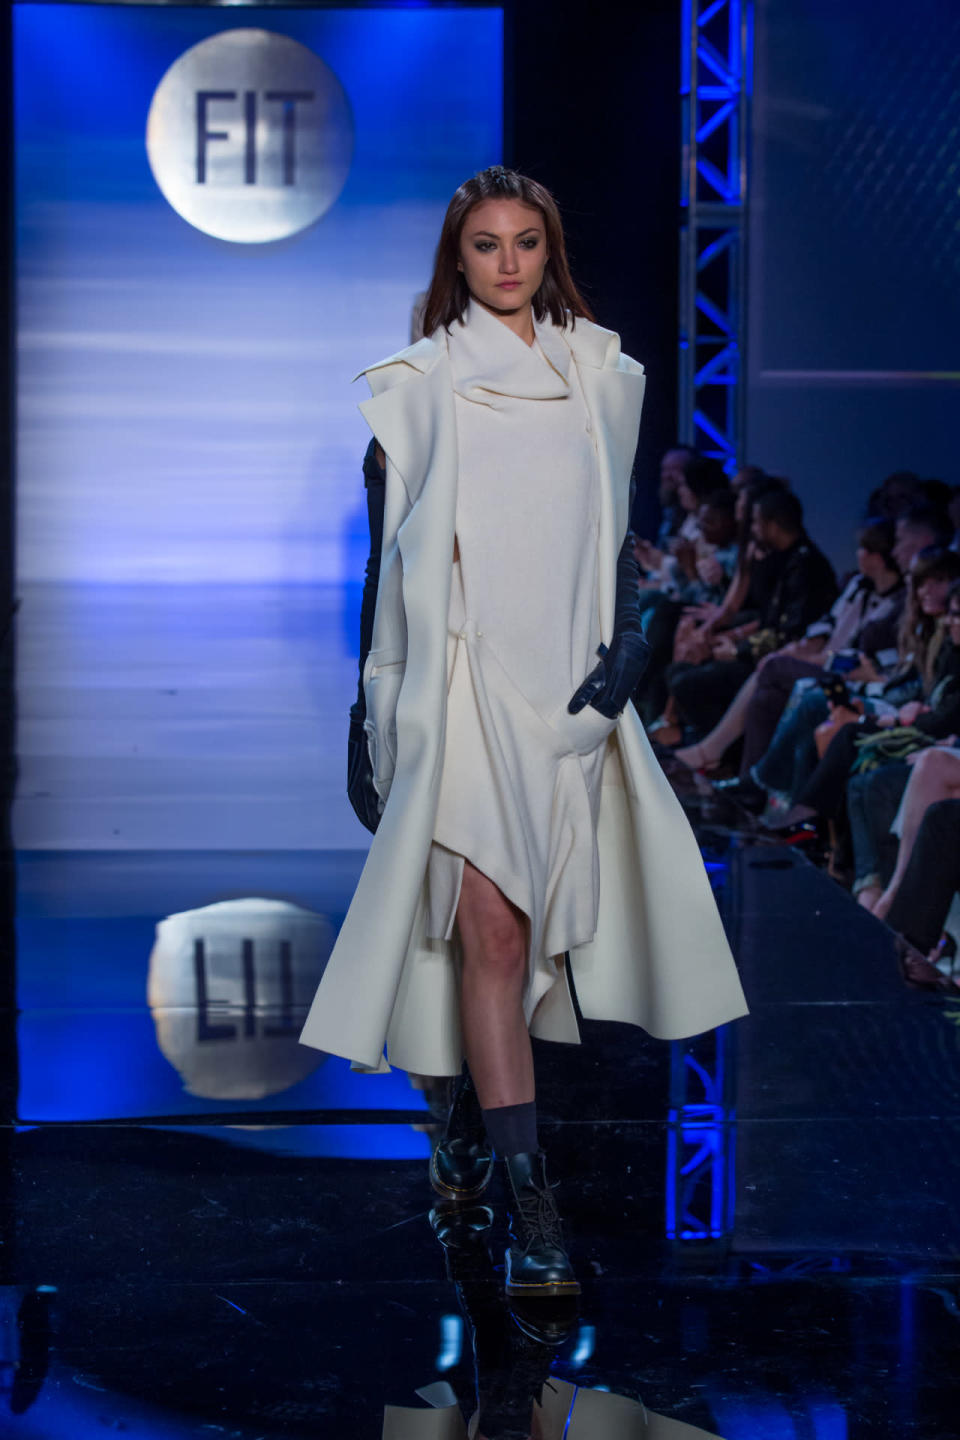 FIT graduate Ahra Gho’s design is the cool, winter-white coat of our dreams.